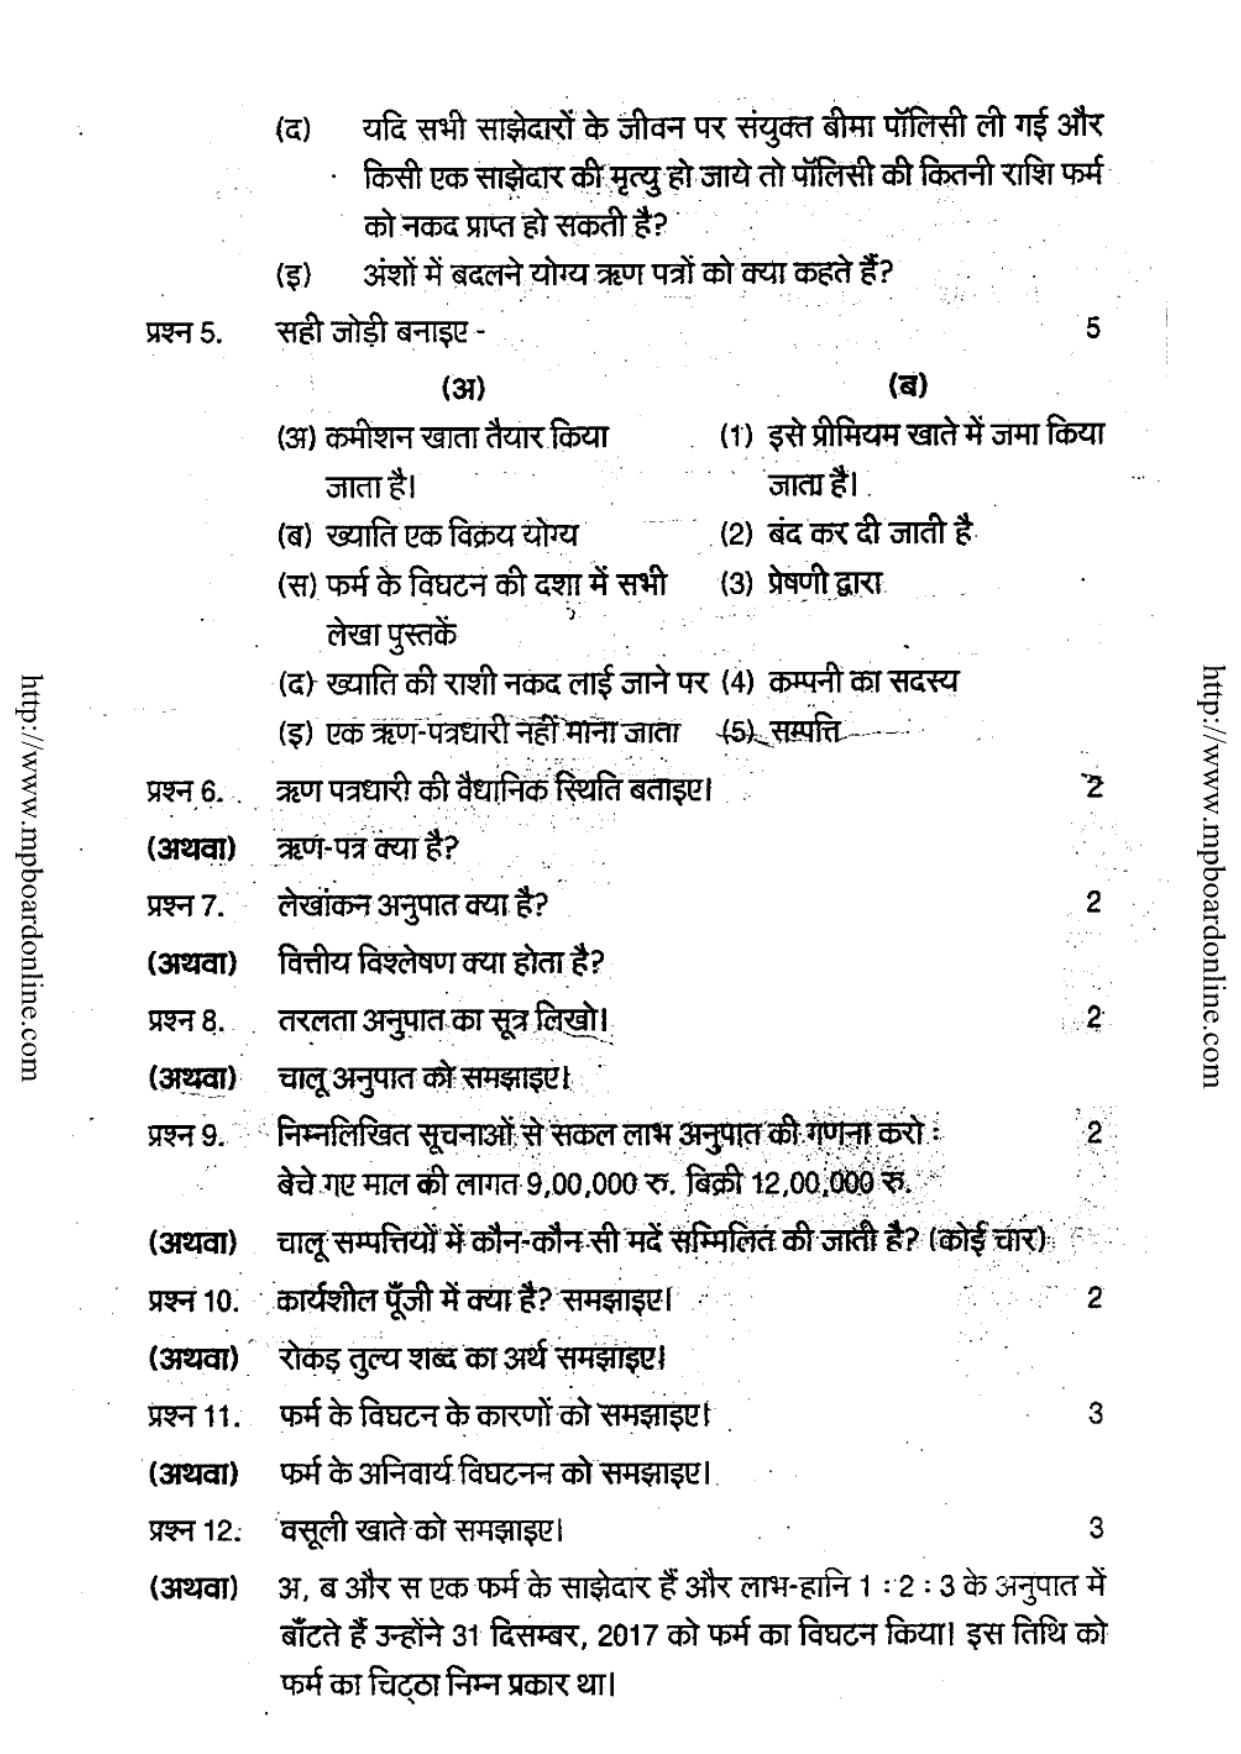 MP Board Class 12 Book Keeping And Accountancy 2018 Question Paper - Page 9